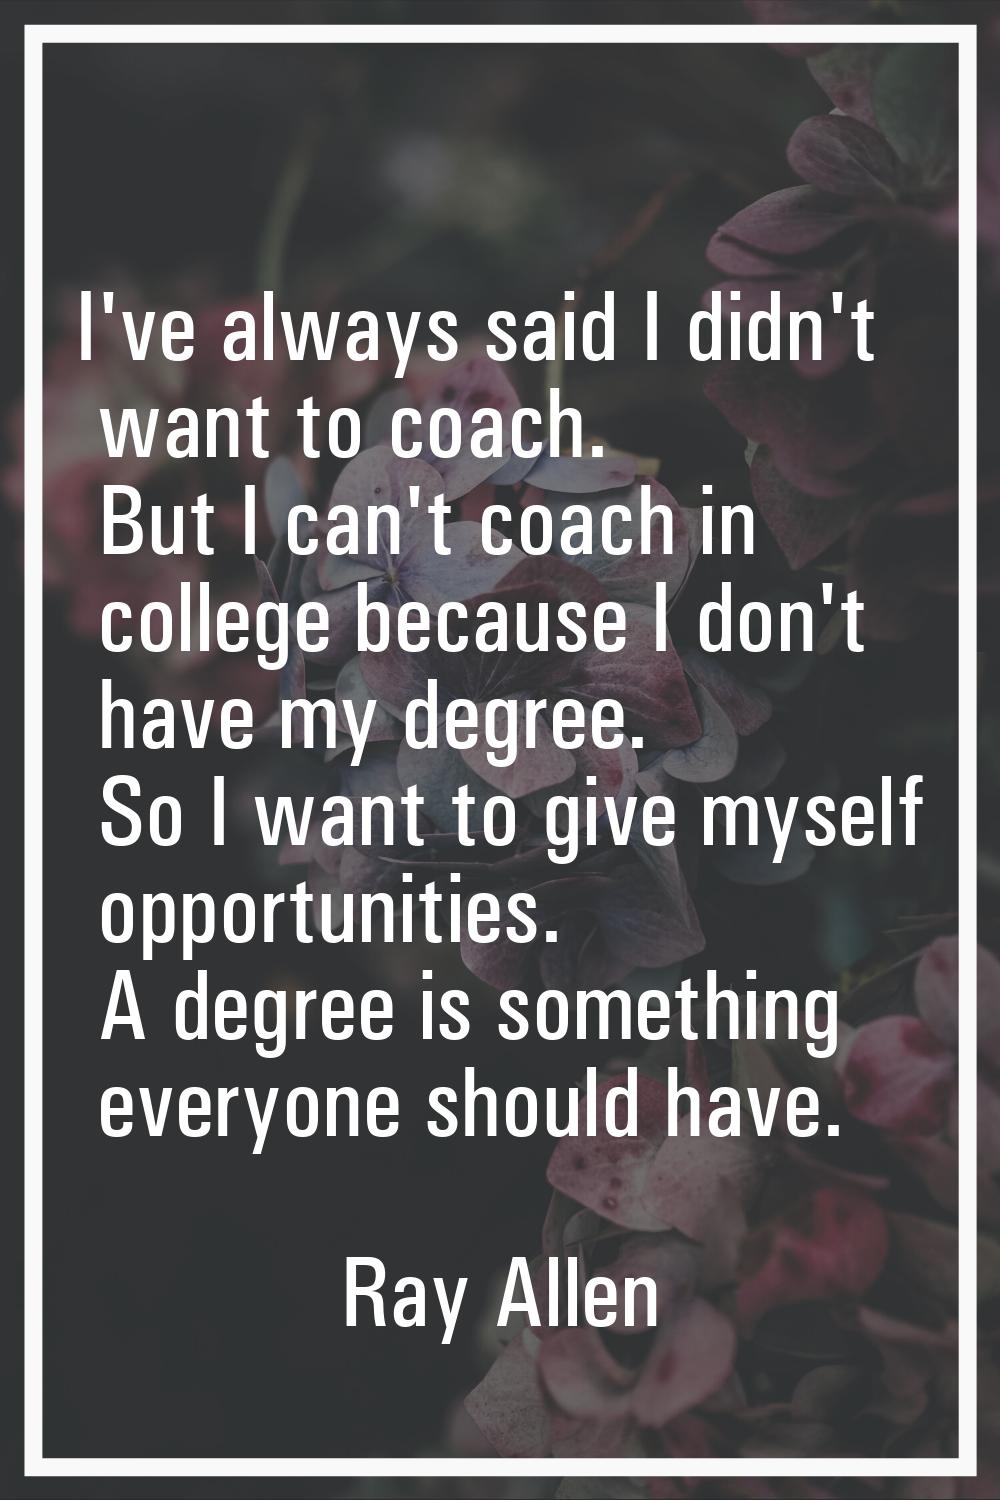 I've always said I didn't want to coach. But I can't coach in college because I don't have my degre